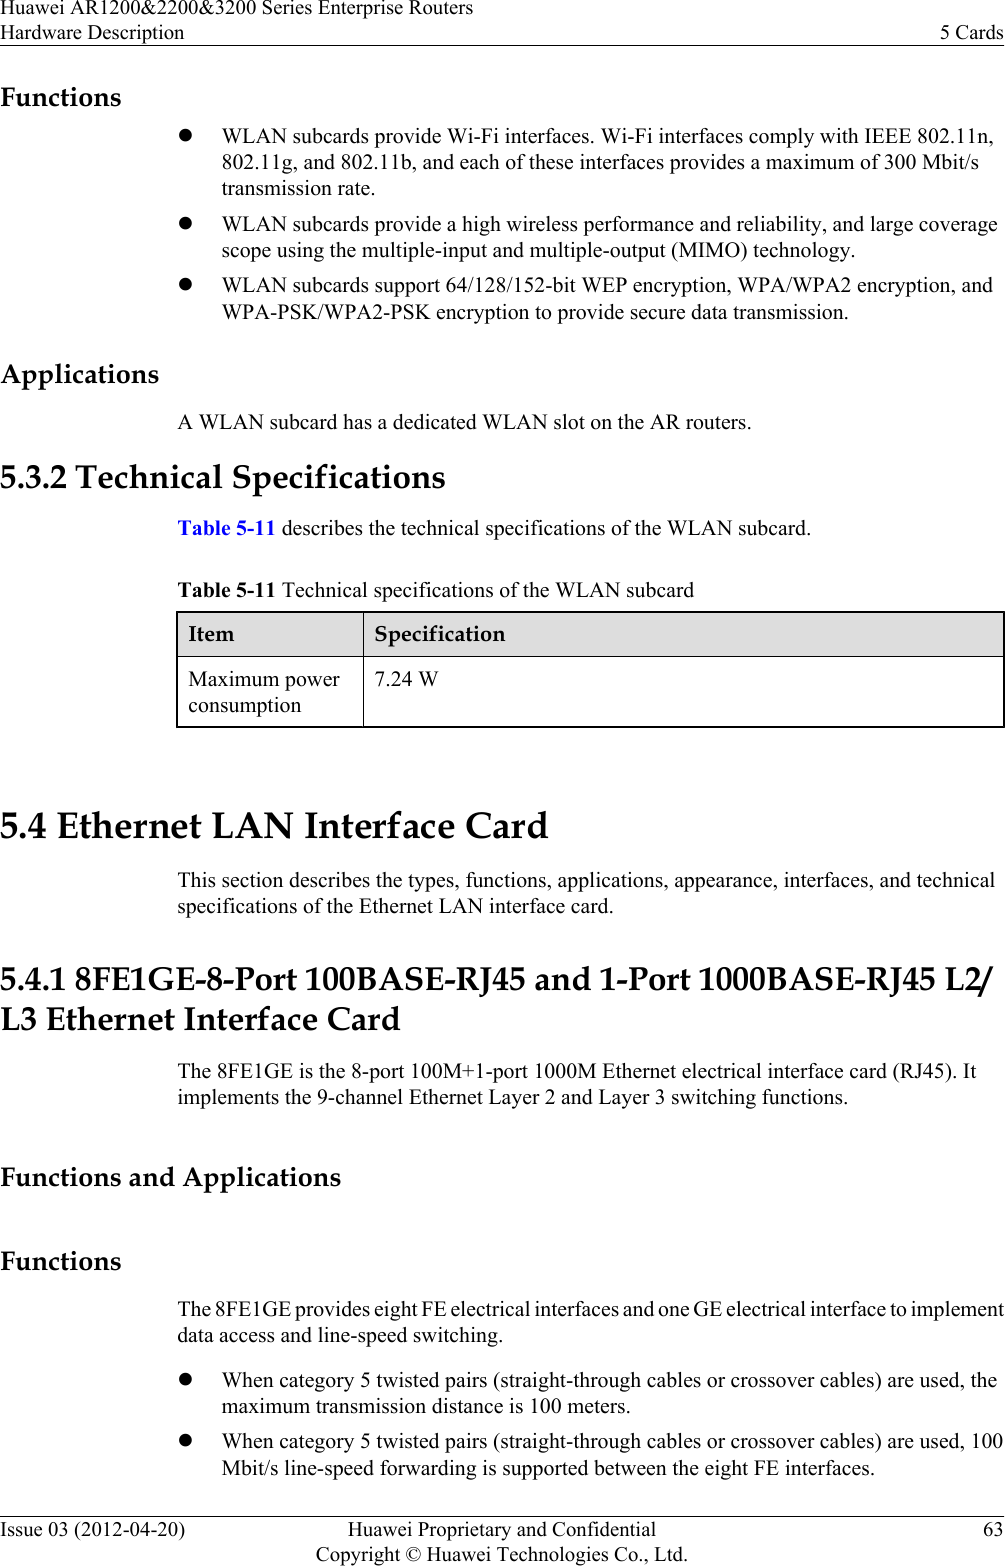 FunctionslWLAN subcards provide Wi-Fi interfaces. Wi-Fi interfaces comply with IEEE 802.11n,802.11g, and 802.11b, and each of these interfaces provides a maximum of 300 Mbit/stransmission rate.lWLAN subcards provide a high wireless performance and reliability, and large coveragescope using the multiple-input and multiple-output (MIMO) technology.lWLAN subcards support 64/128/152-bit WEP encryption, WPA/WPA2 encryption, andWPA-PSK/WPA2-PSK encryption to provide secure data transmission.ApplicationsA WLAN subcard has a dedicated WLAN slot on the AR routers.5.3.2 Technical SpecificationsTable 5-11 describes the technical specifications of the WLAN subcard.Table 5-11 Technical specifications of the WLAN subcardItem SpecificationMaximum powerconsumption7.24 W 5.4 Ethernet LAN Interface CardThis section describes the types, functions, applications, appearance, interfaces, and technicalspecifications of the Ethernet LAN interface card.5.4.1 8FE1GE-8-Port 100BASE-RJ45 and 1-Port 1000BASE-RJ45 L2/L3 Ethernet Interface CardThe 8FE1GE is the 8-port 100M+1-port 1000M Ethernet electrical interface card (RJ45). Itimplements the 9-channel Ethernet Layer 2 and Layer 3 switching functions.Functions and ApplicationsFunctionsThe 8FE1GE provides eight FE electrical interfaces and one GE electrical interface to implementdata access and line-speed switching.lWhen category 5 twisted pairs (straight-through cables or crossover cables) are used, themaximum transmission distance is 100 meters.lWhen category 5 twisted pairs (straight-through cables or crossover cables) are used, 100Mbit/s line-speed forwarding is supported between the eight FE interfaces.Huawei AR1200&amp;2200&amp;3200 Series Enterprise RoutersHardware Description 5 CardsIssue 03 (2012-04-20) Huawei Proprietary and ConfidentialCopyright © Huawei Technologies Co., Ltd.63